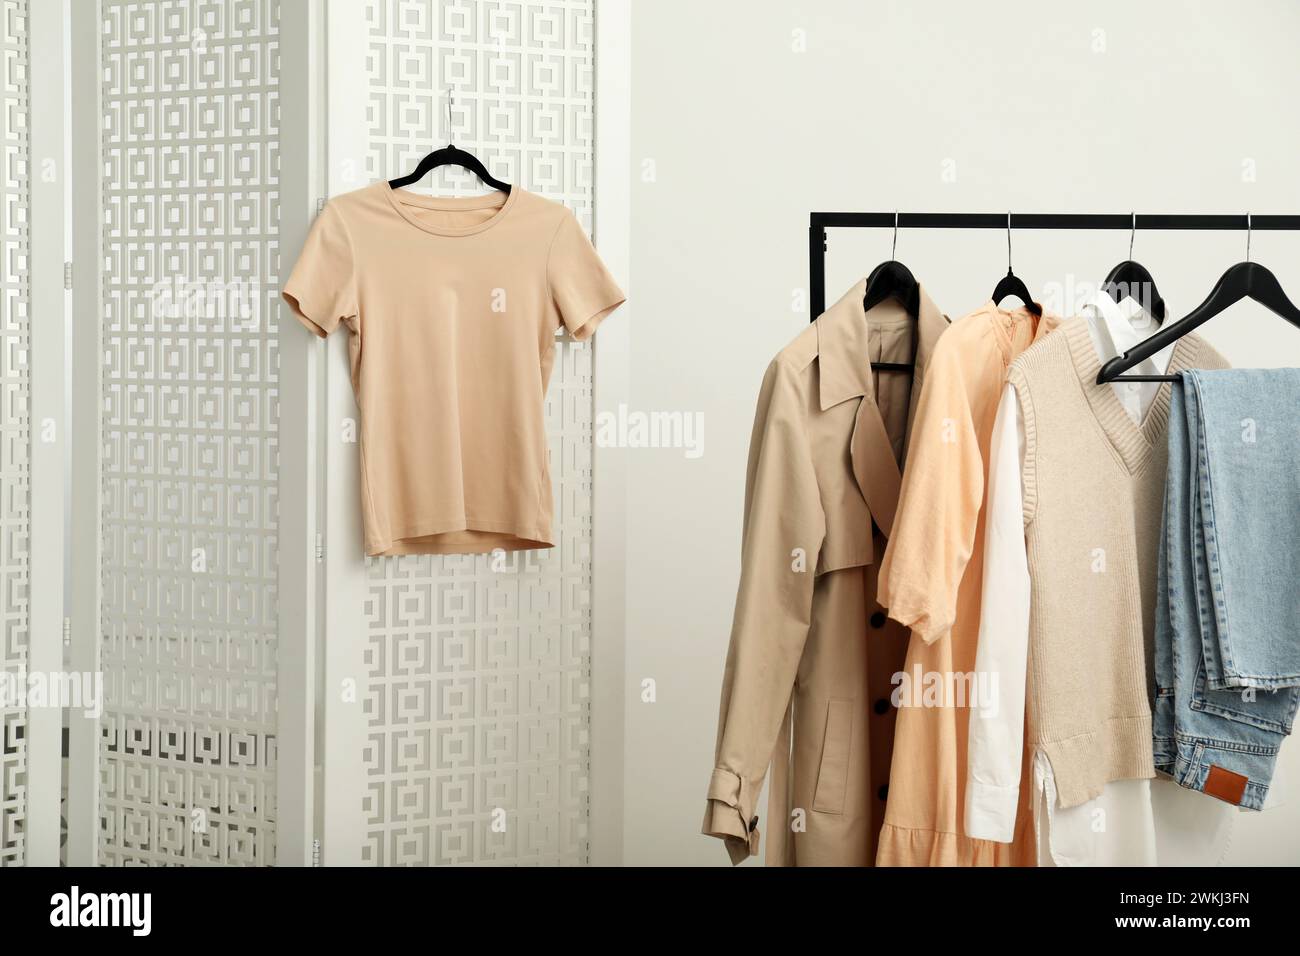 Beige t-shirt hanging on folding screen near rack with stylish women's clothes indoors Stock Photo